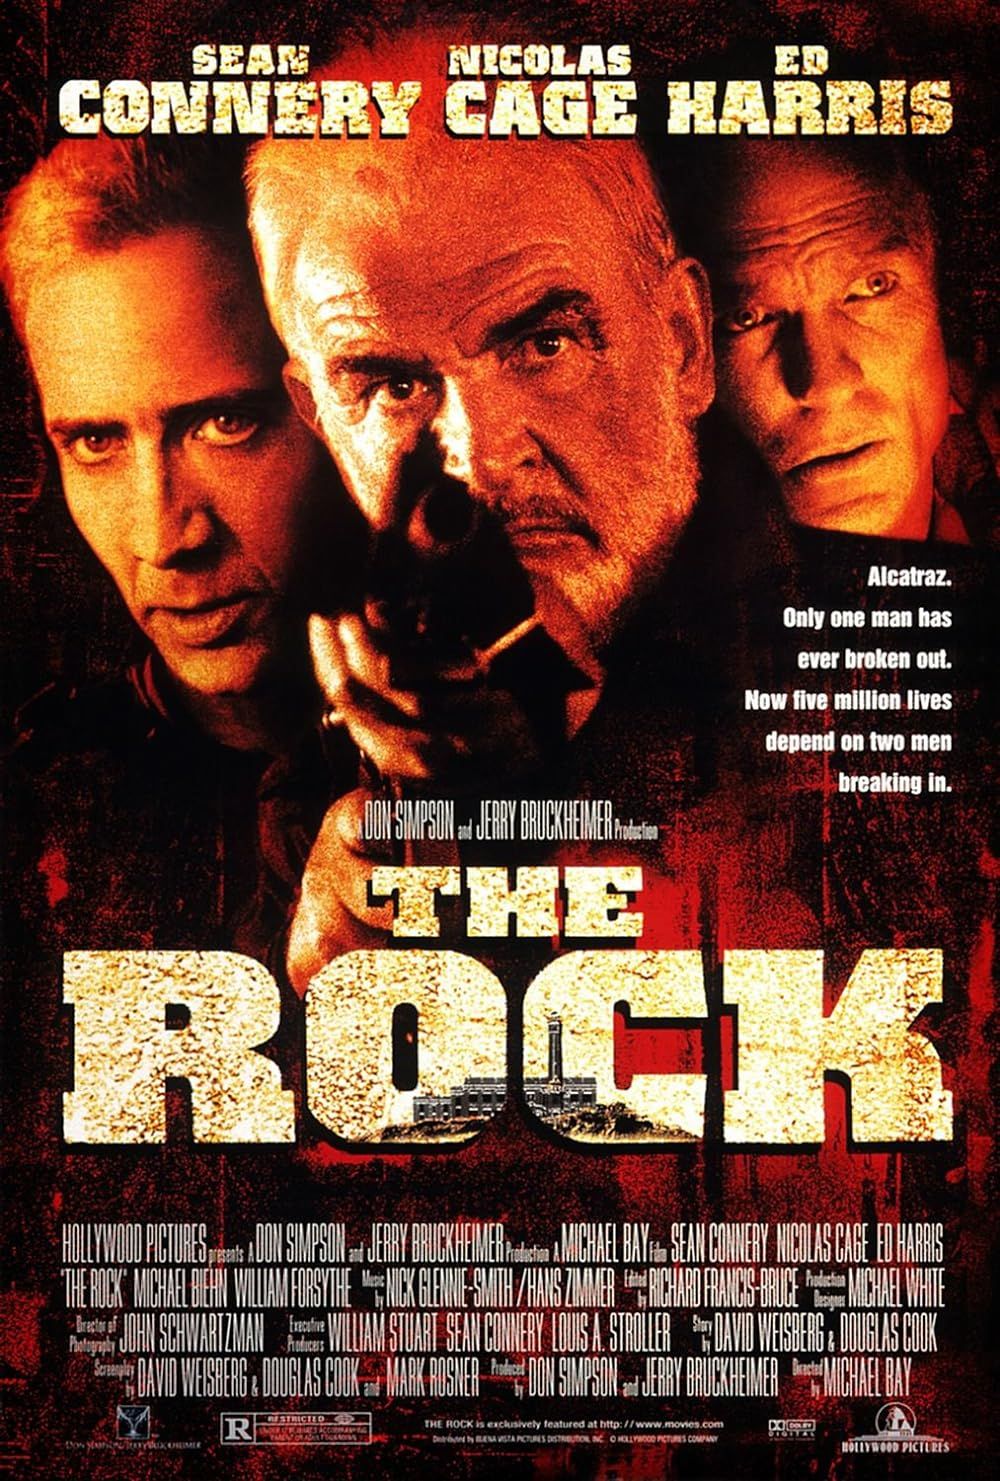 Nic Cage, Sean Connery and Ed Harris on The Rock Poster